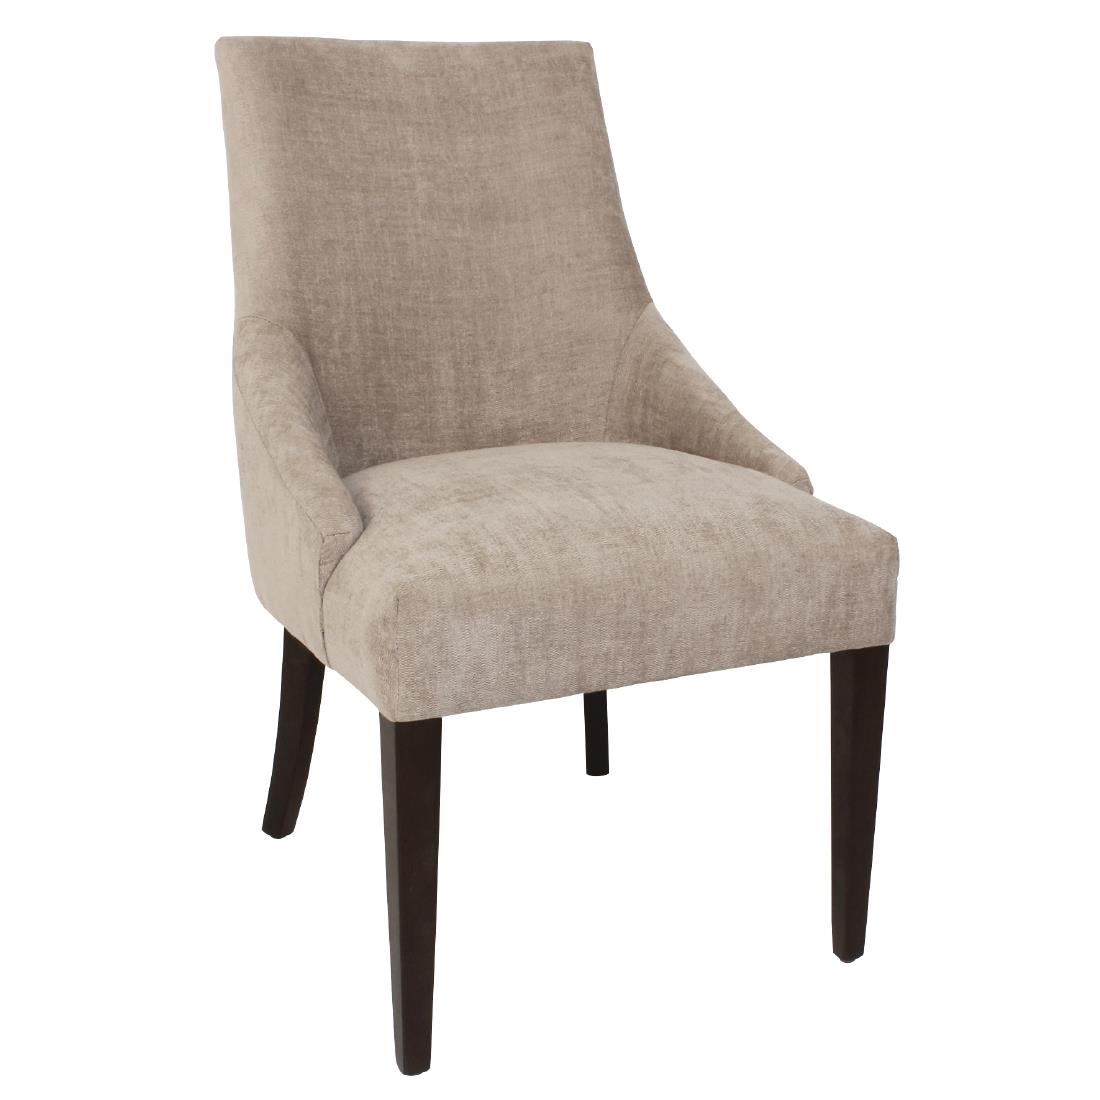 Finesse Dining Chair - Neutral